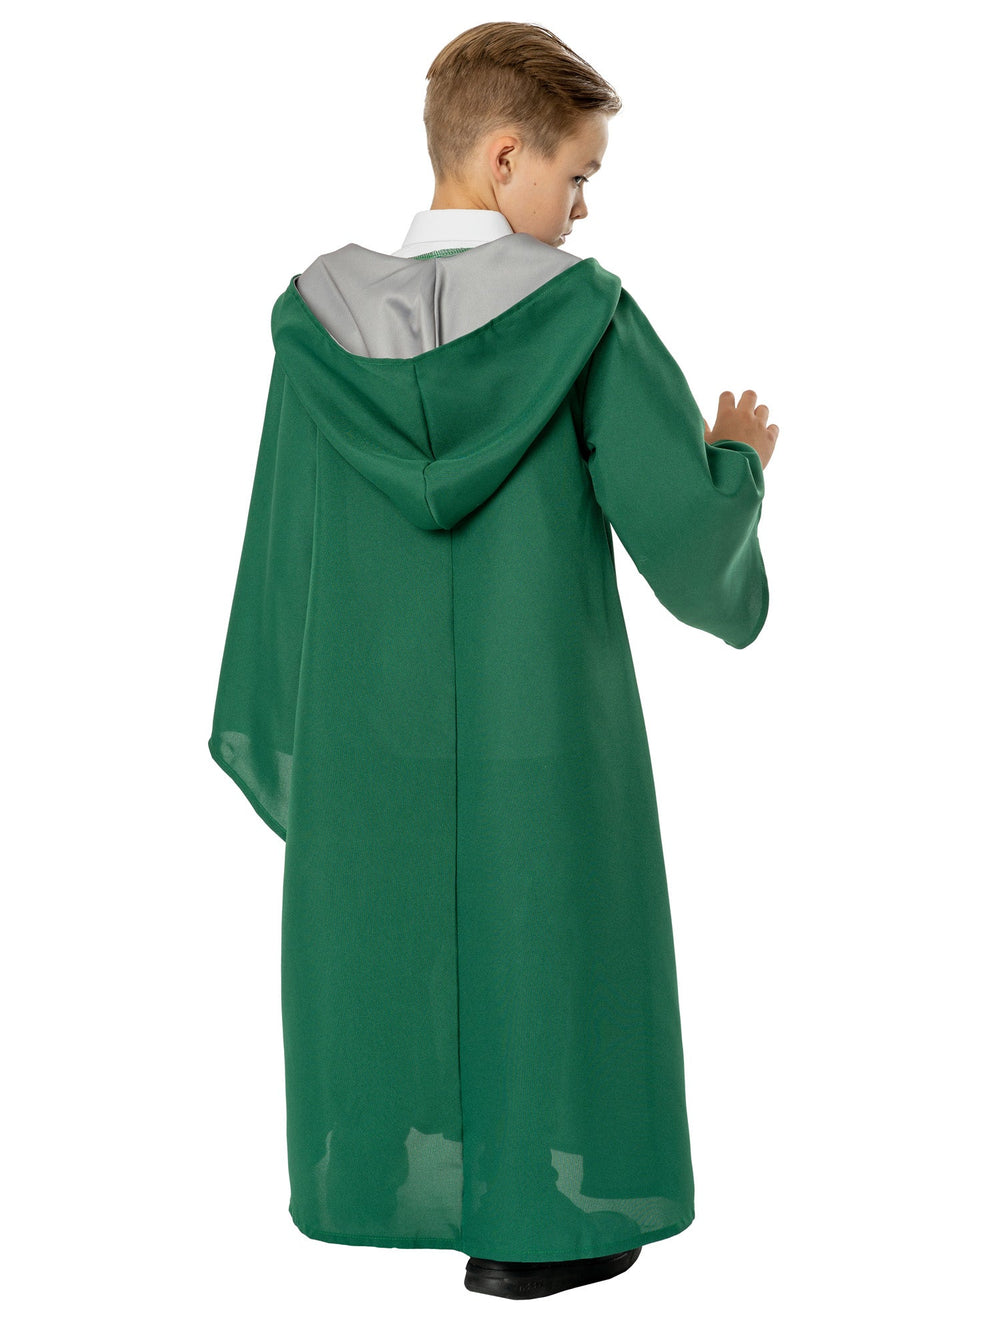 Slytherin Quidditch Robe for Kids Harry Potter Costume_2